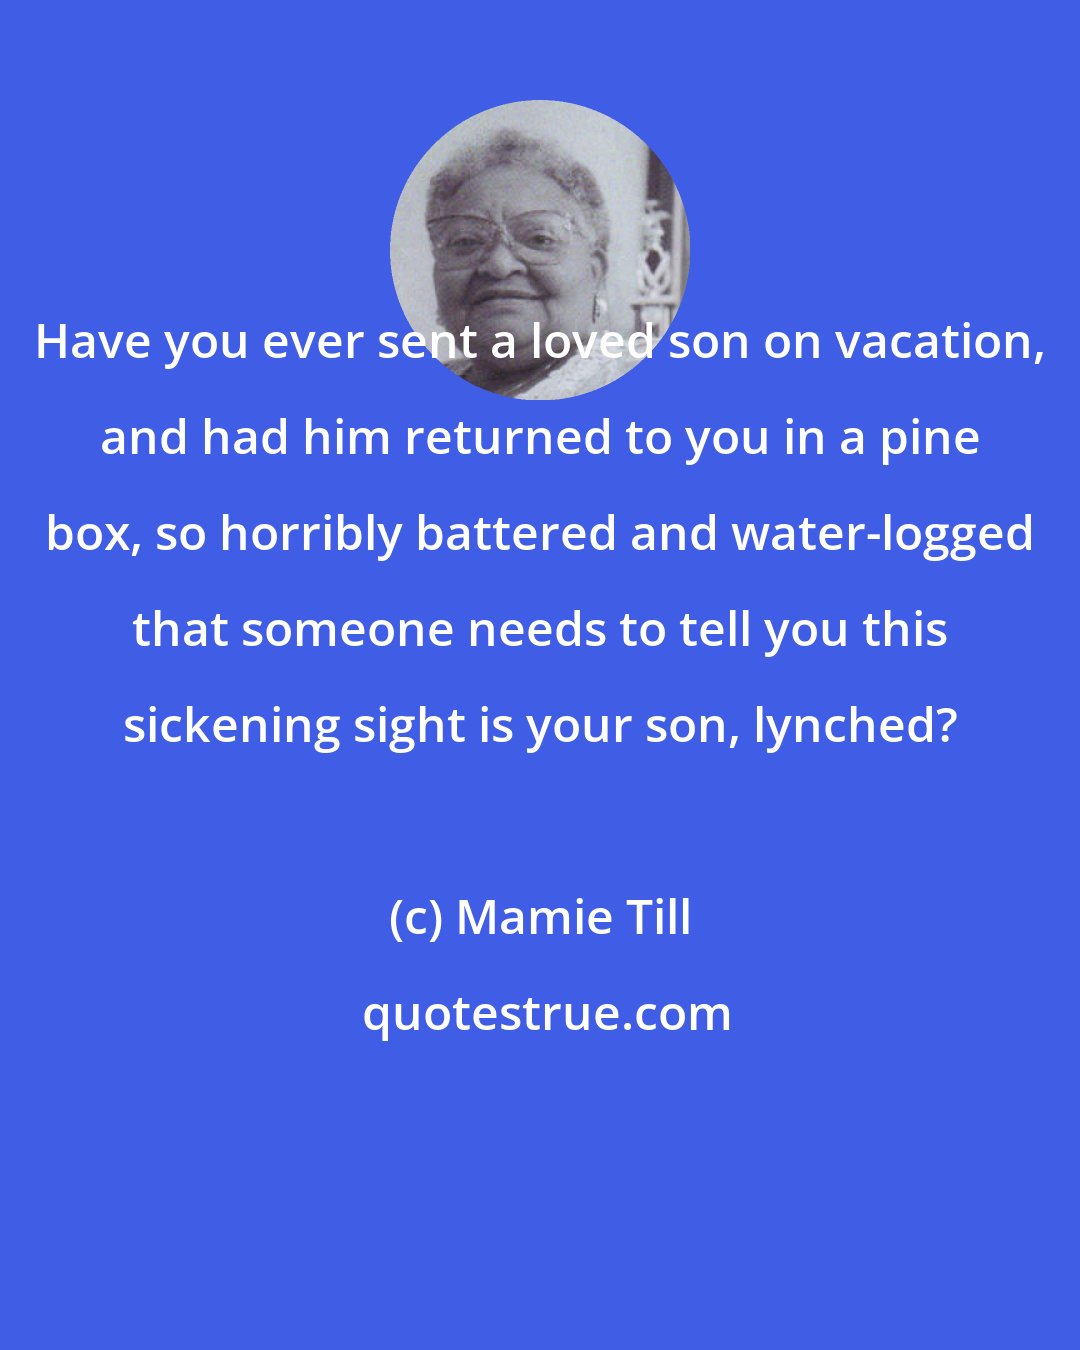 Mamie Till: Have you ever sent a loved son on vacation, and had him returned to you in a pine box, so horribly battered and water-logged that someone needs to tell you this sickening sight is your son, lynched?